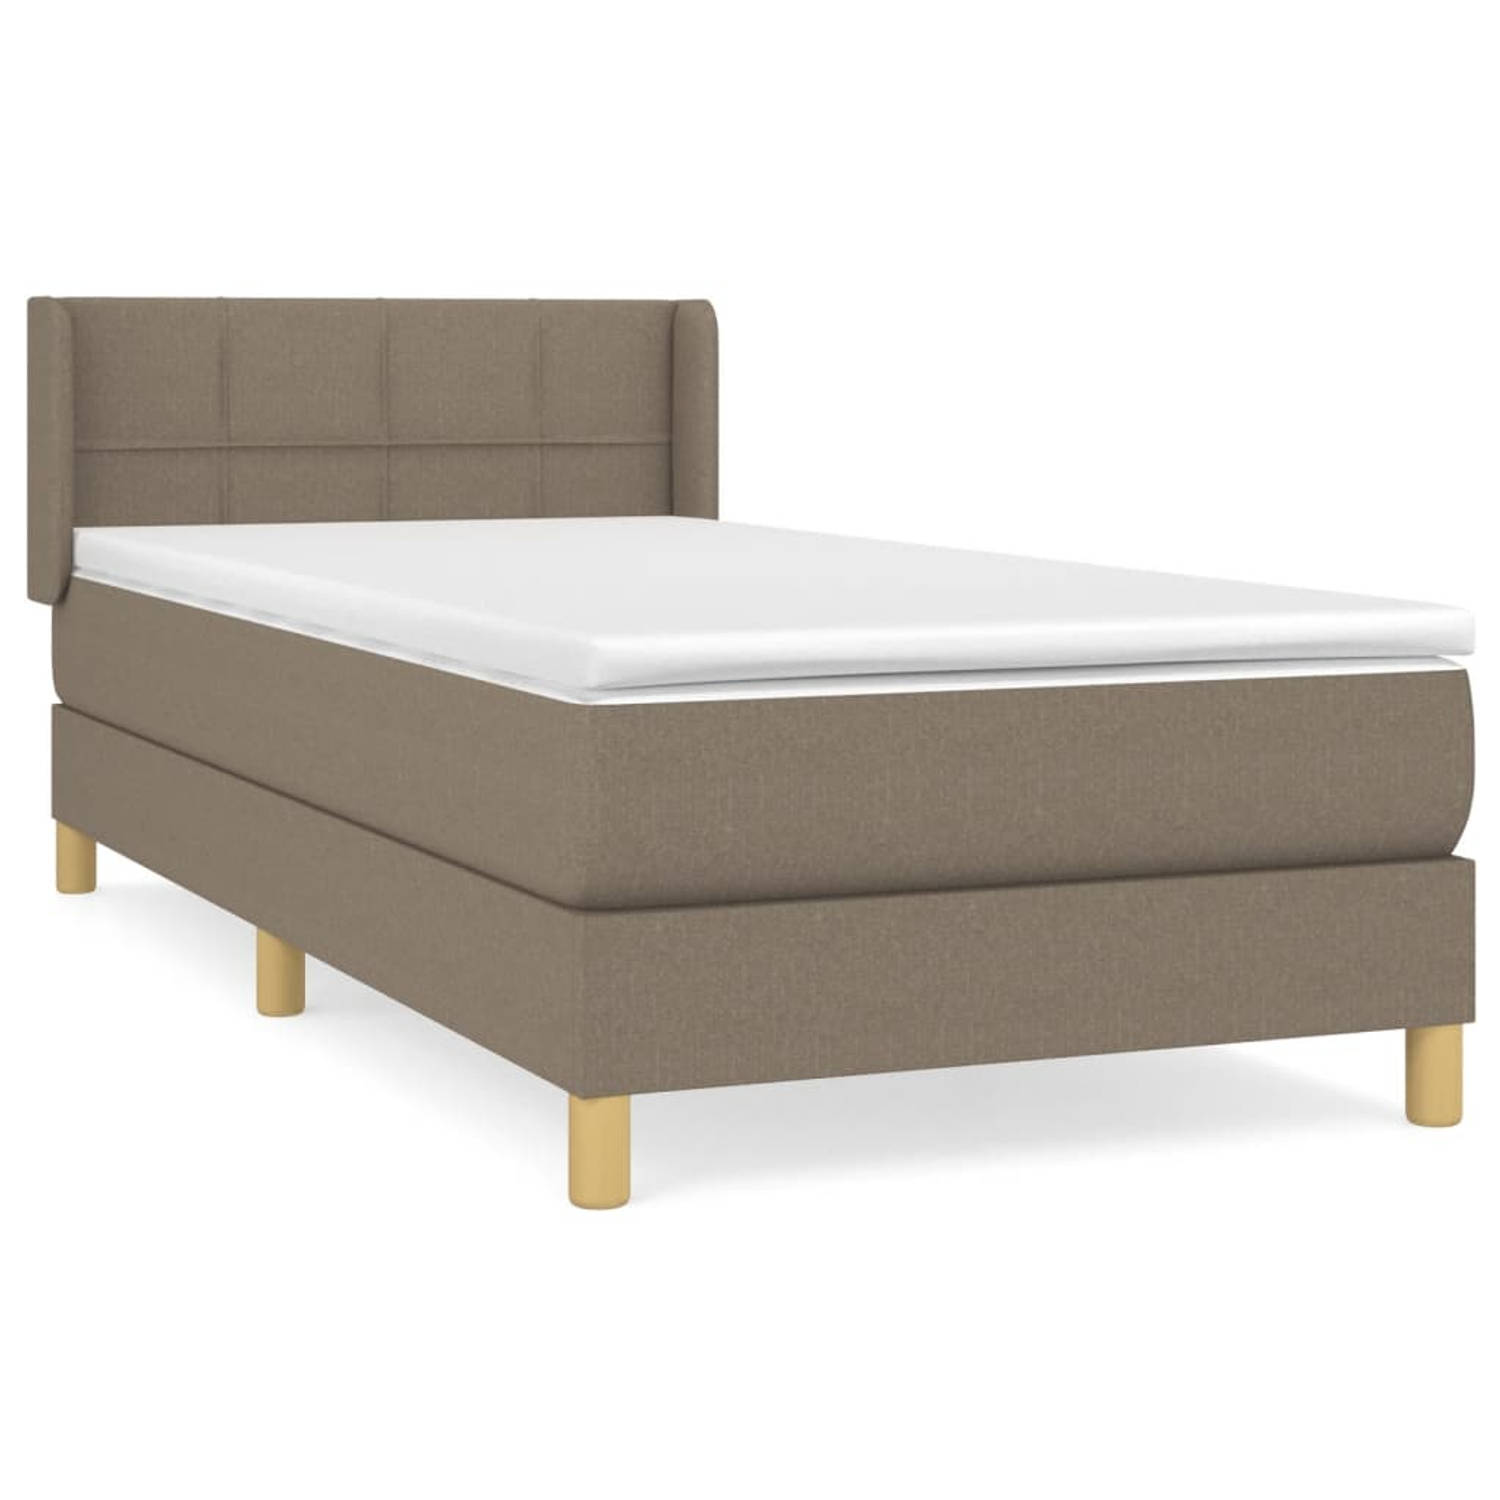 The Living Store Boxspringbed - Bed - 203 x 83 x 78/88 cm - Taupe - Stof - Pocketvering - Middelharde ondersteuning